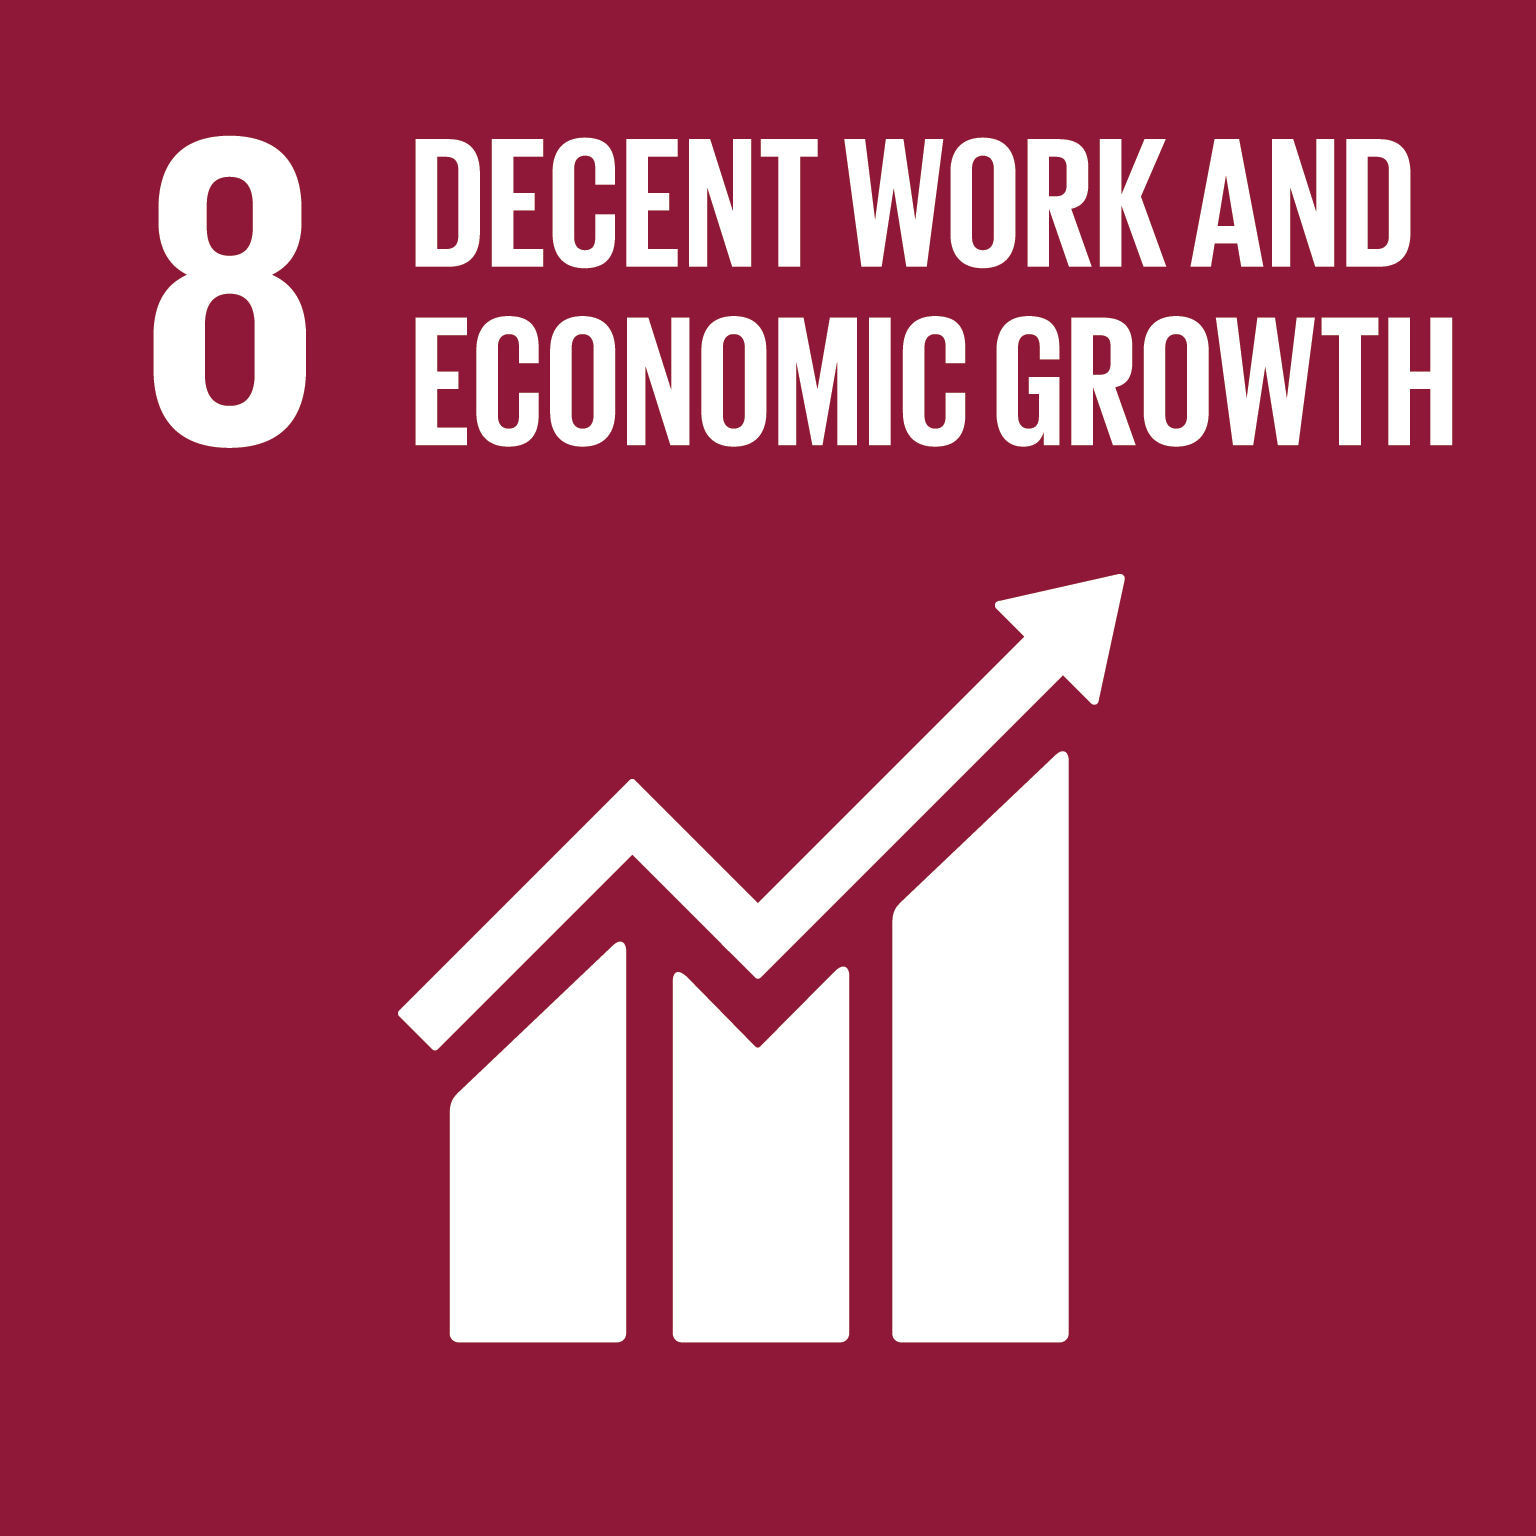 Goal 8. Decent work and economic growth